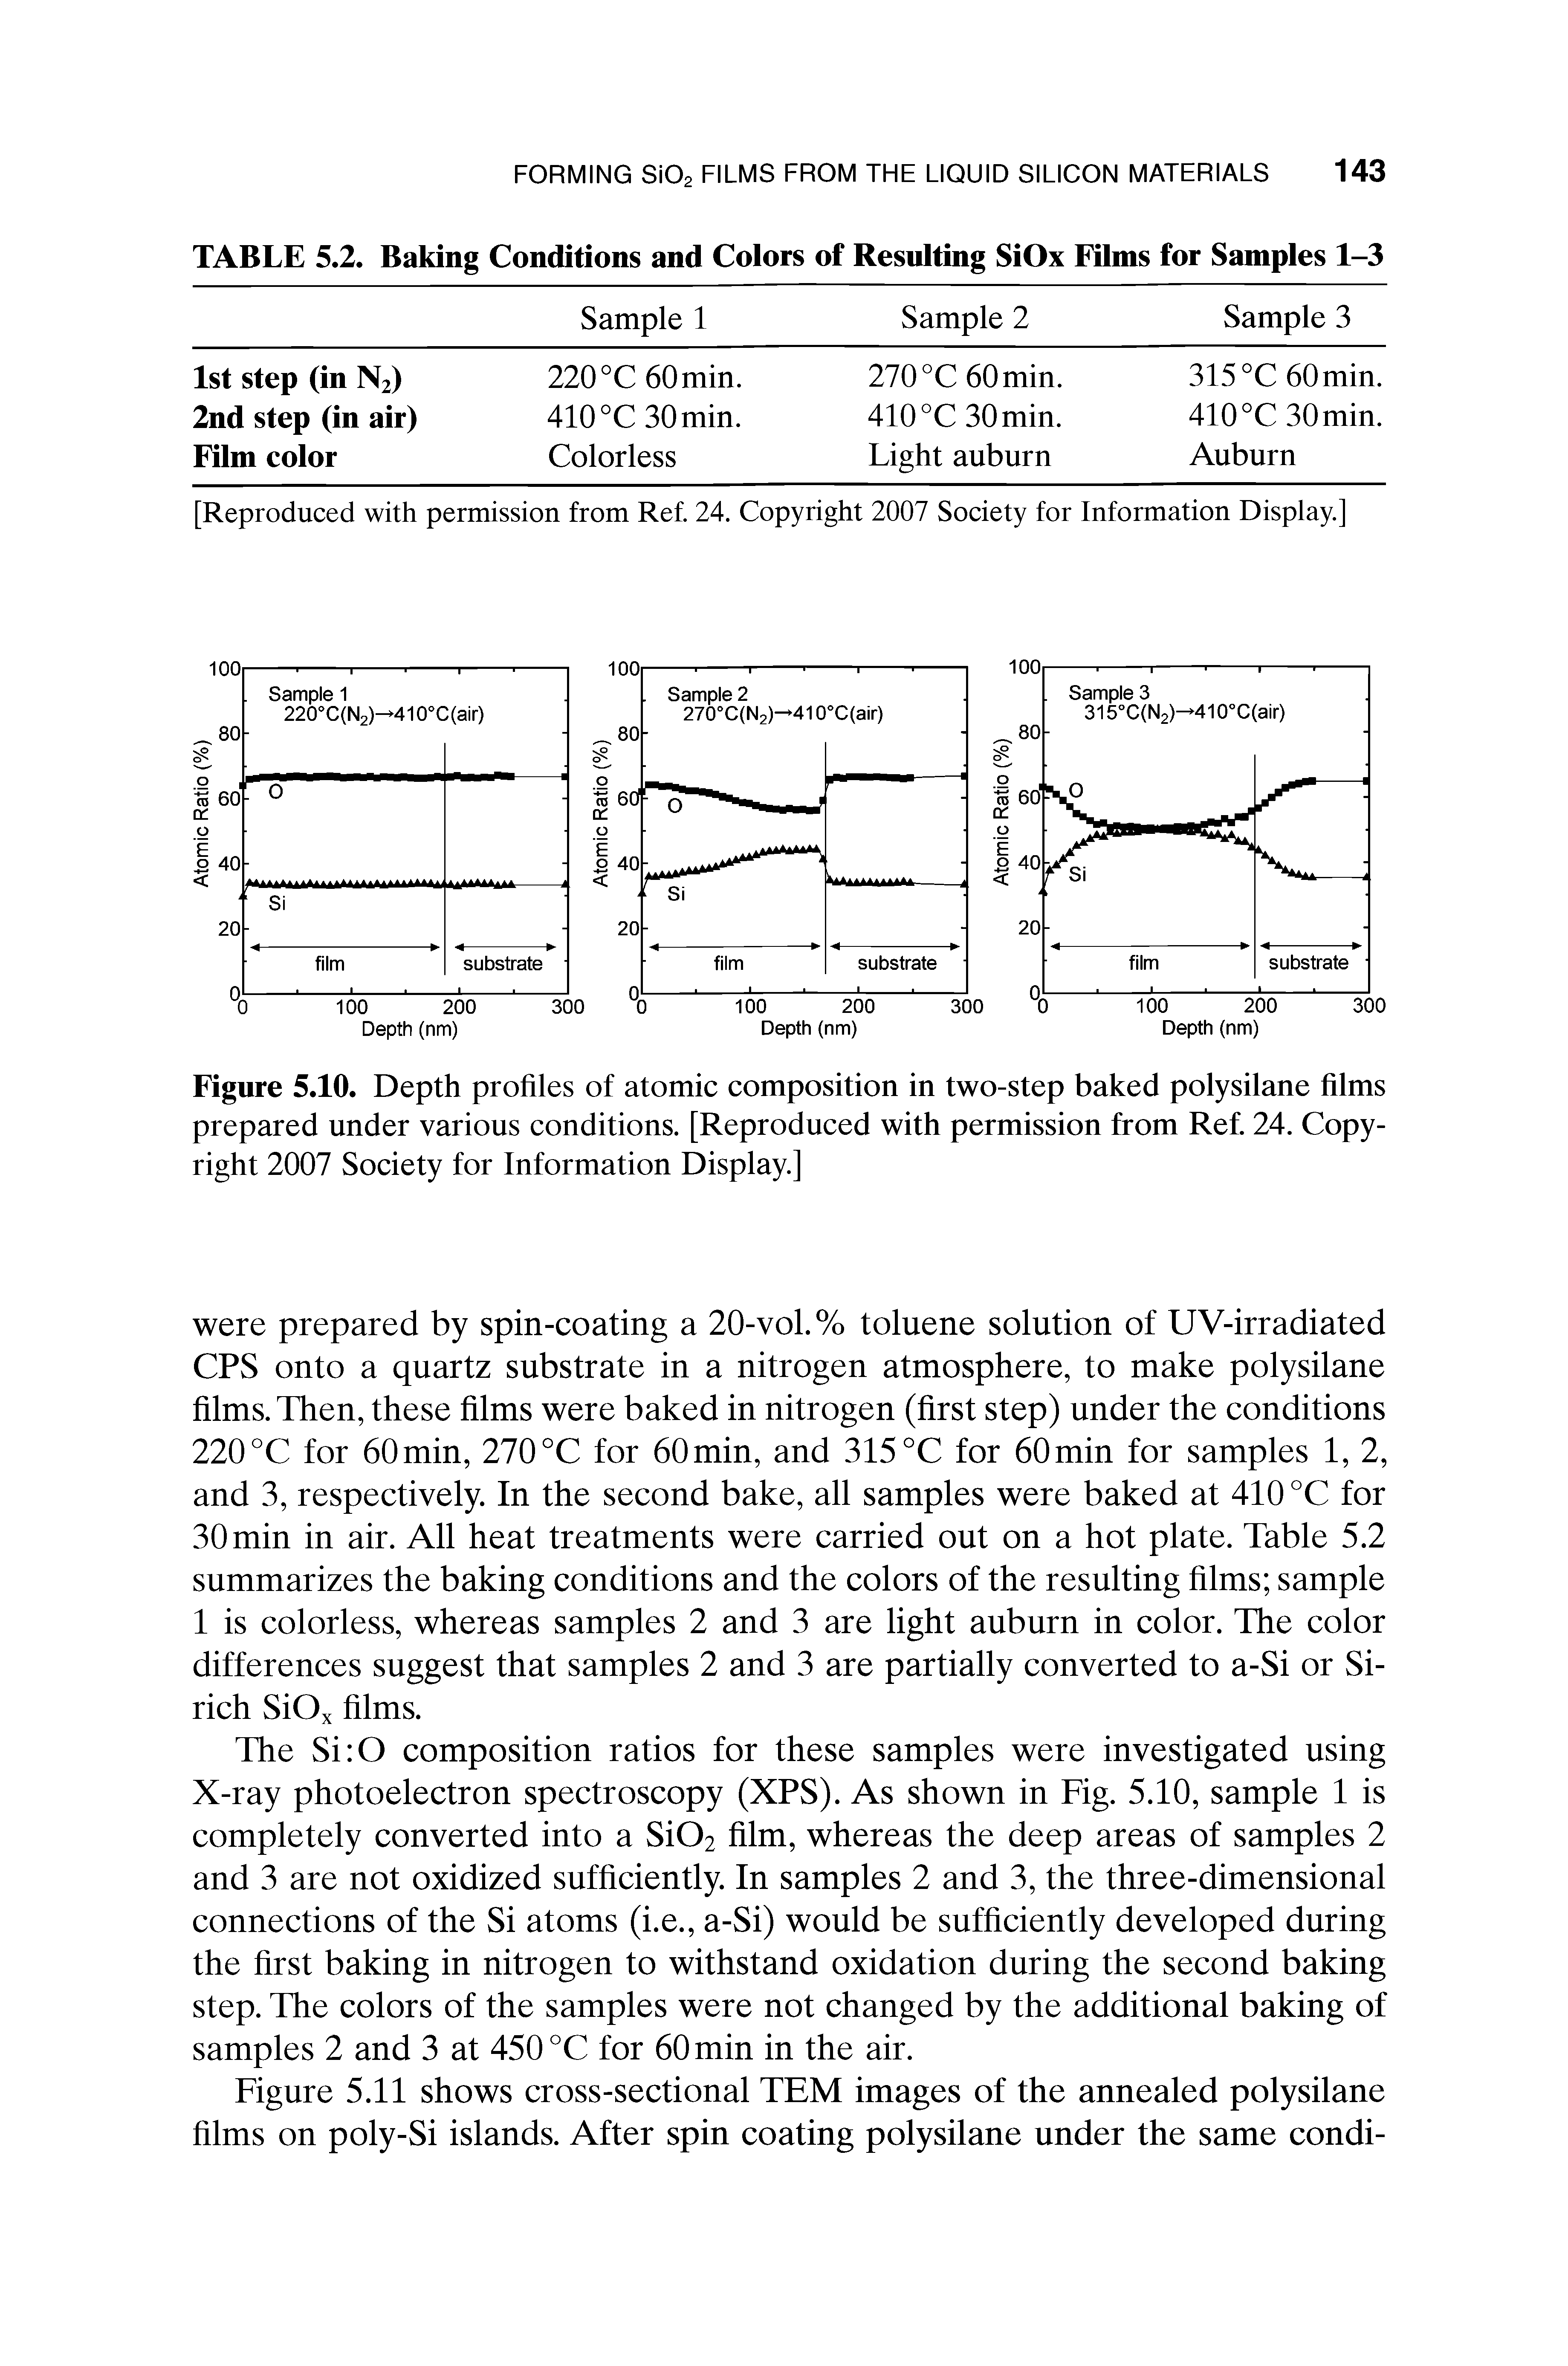 Figure 5.10. Depth profiles of atomic composition in two-step baked polysilane films prepared under various conditions. [Reproduced with permission from Ref. 24. Copyright 2007 Society for Information Display.]...